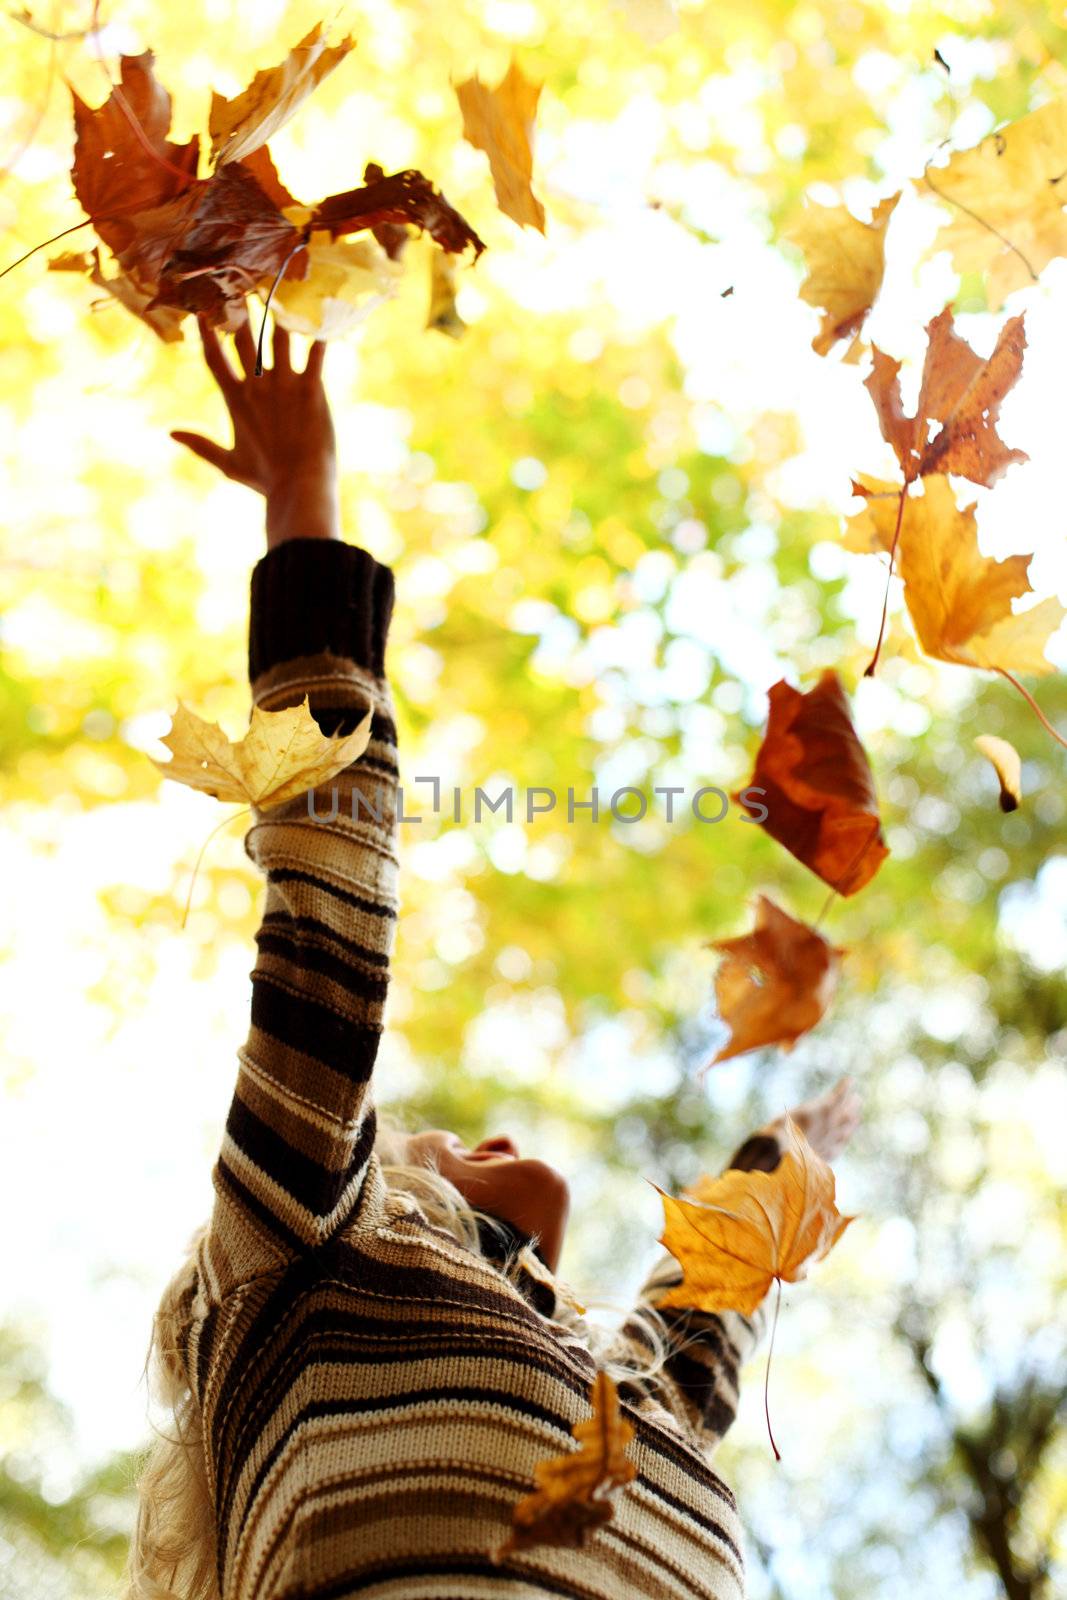 woman portret in autumn leaf by Yellowj